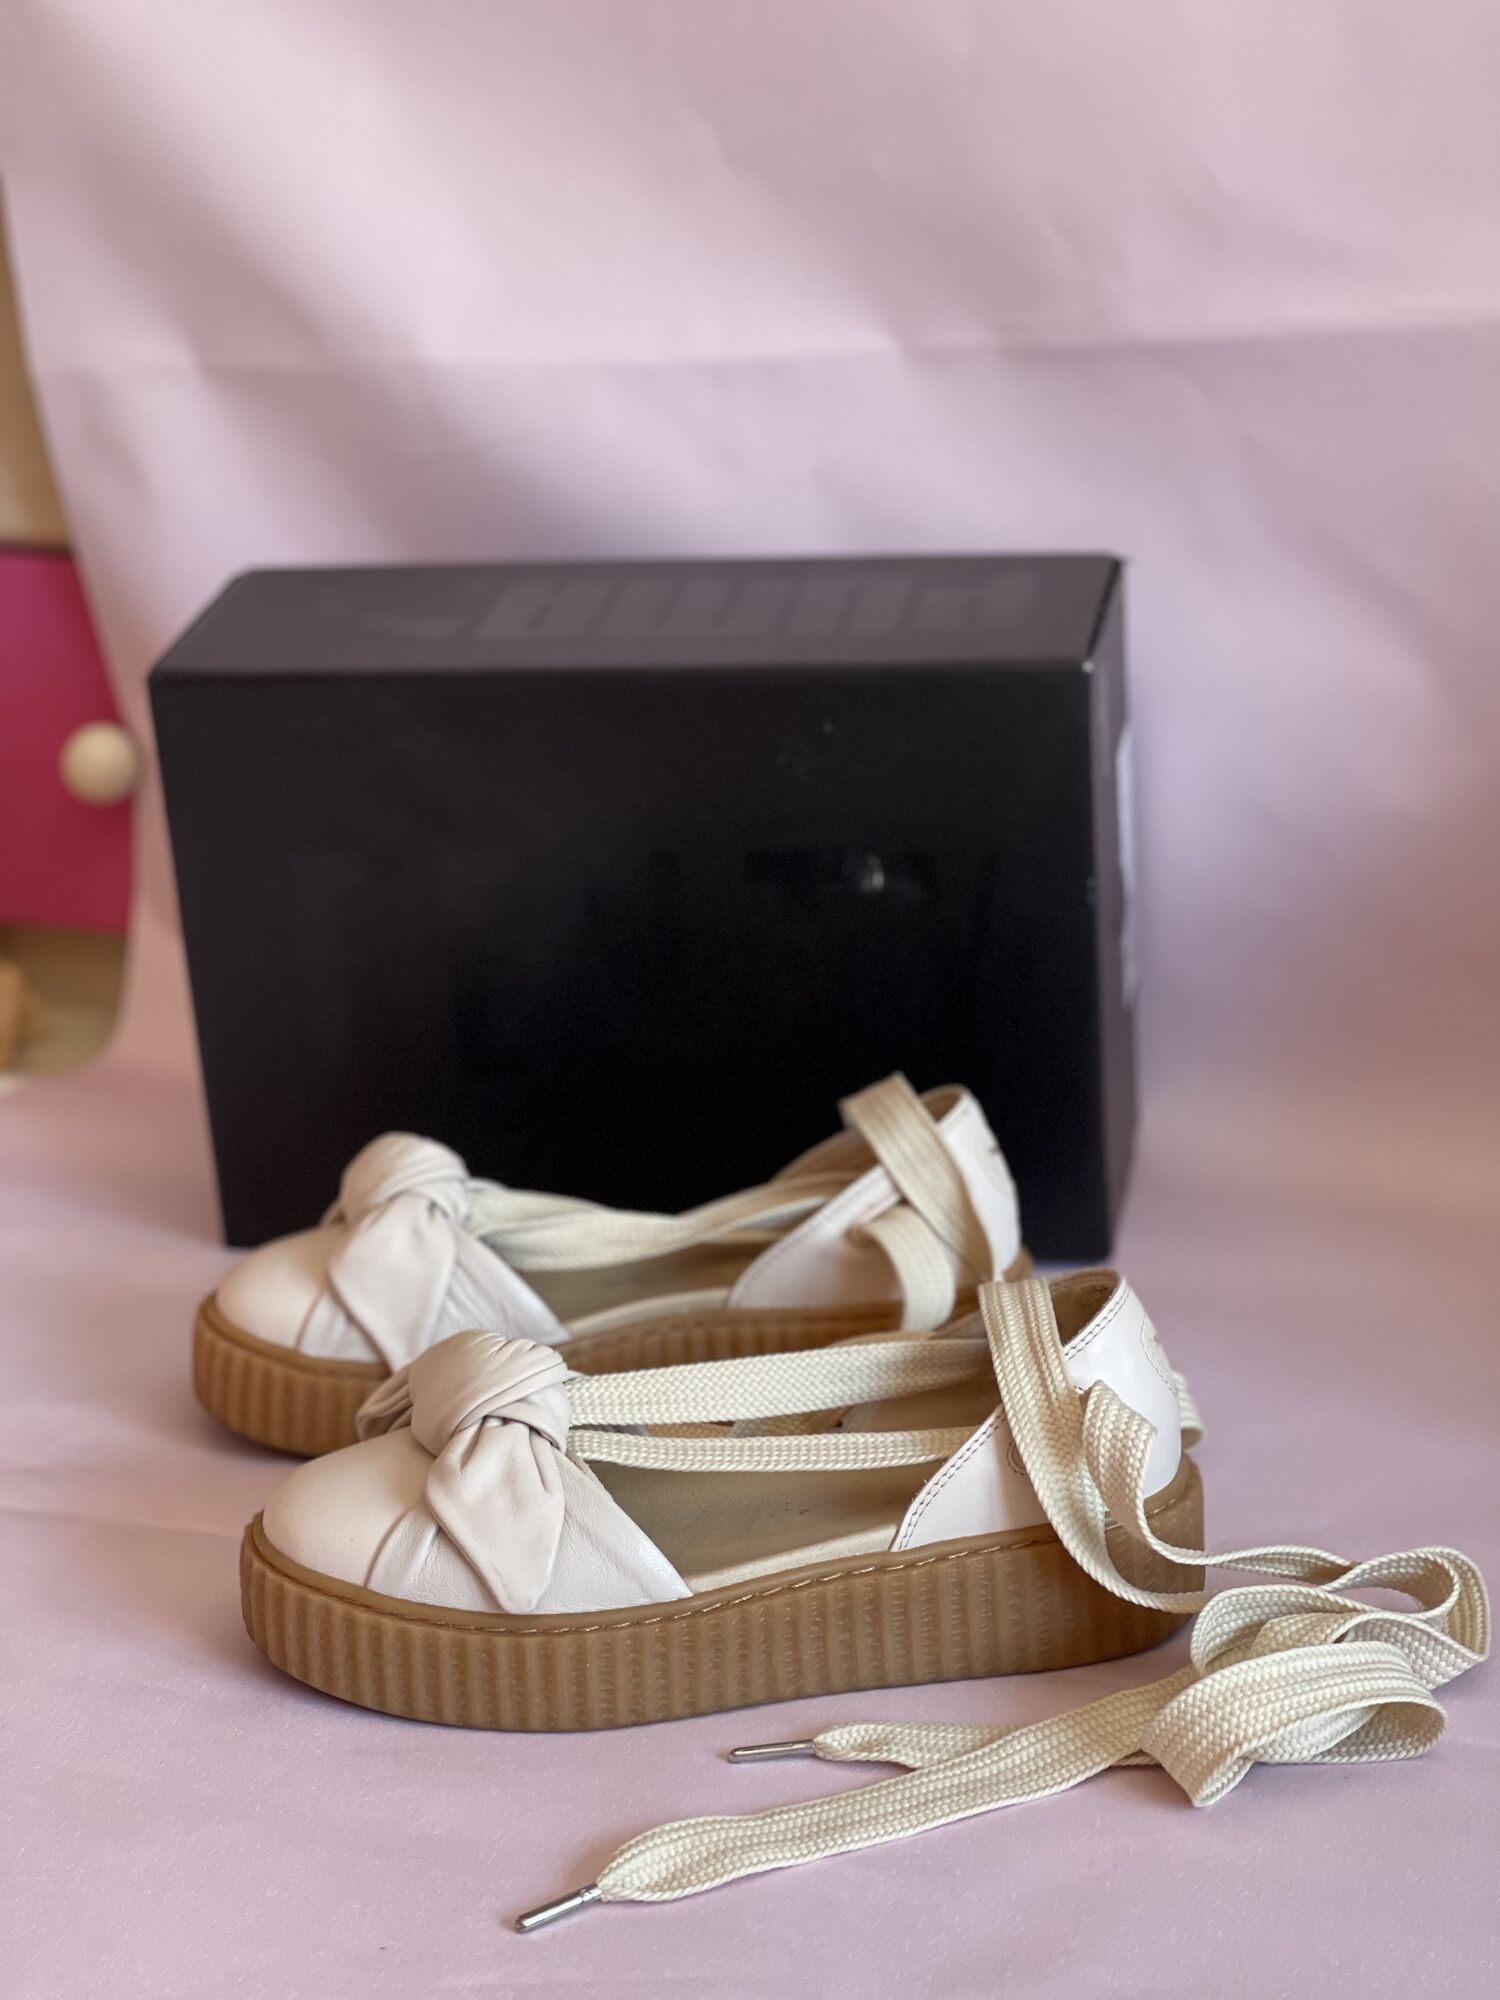 conspiracy censorship Stab Leather Bow Creeper Sandal Espadrilles Fenty x Puma - IT 37.5, buy  pre-owned at 50 EUR